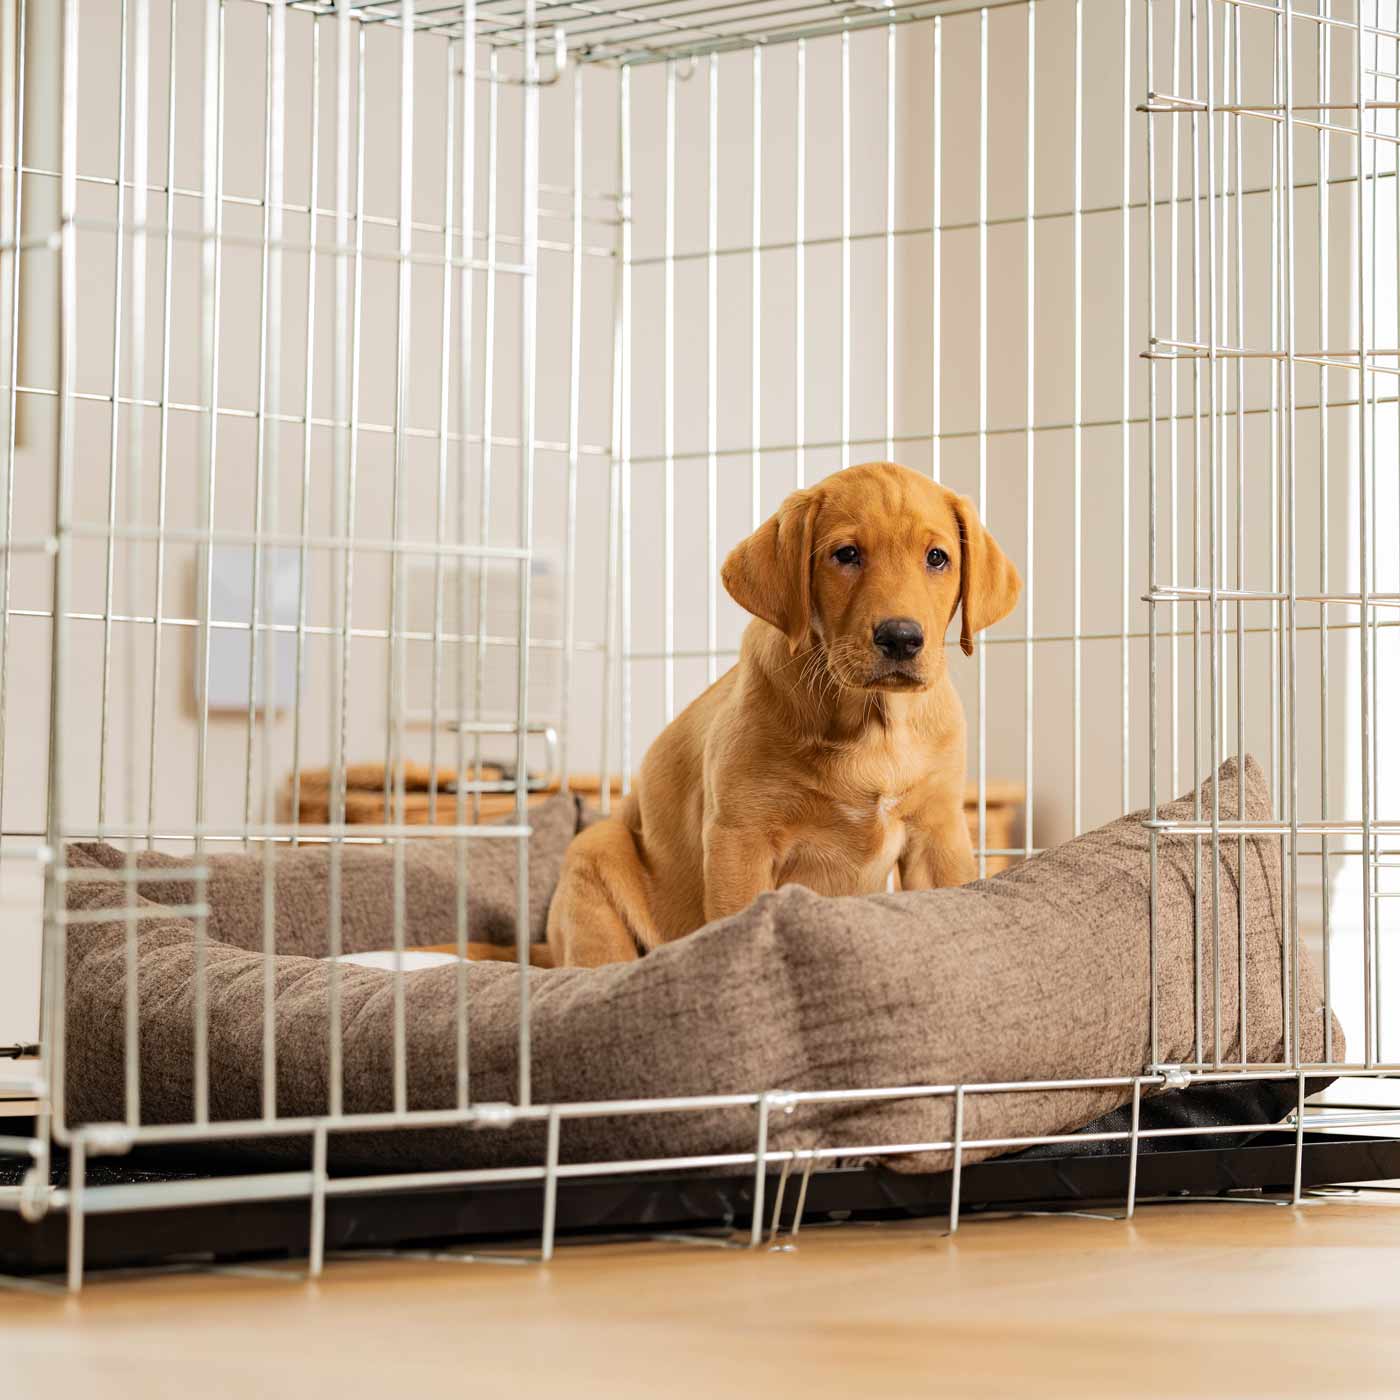 Inchmurrin Cosy & Calm Puppy Box Bed, The Perfect Dog Crate Bed For Pets! To Build The Ultimate Dog Den! In Brown Ember! Available To Personalise Now at Lords & Labradors 